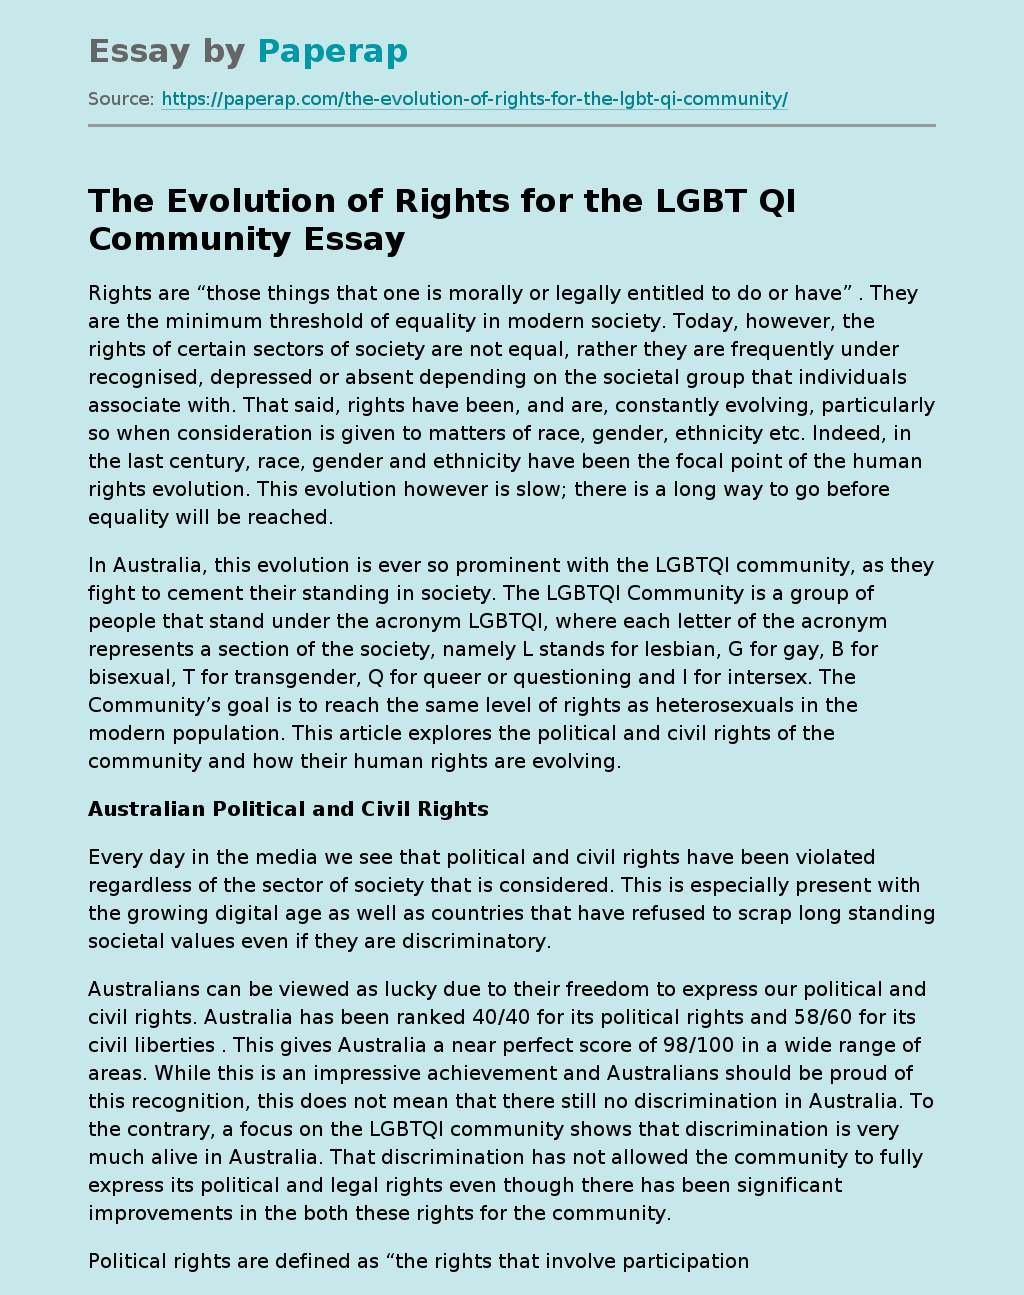 The Evolution of Rights for the LGBT QI Community